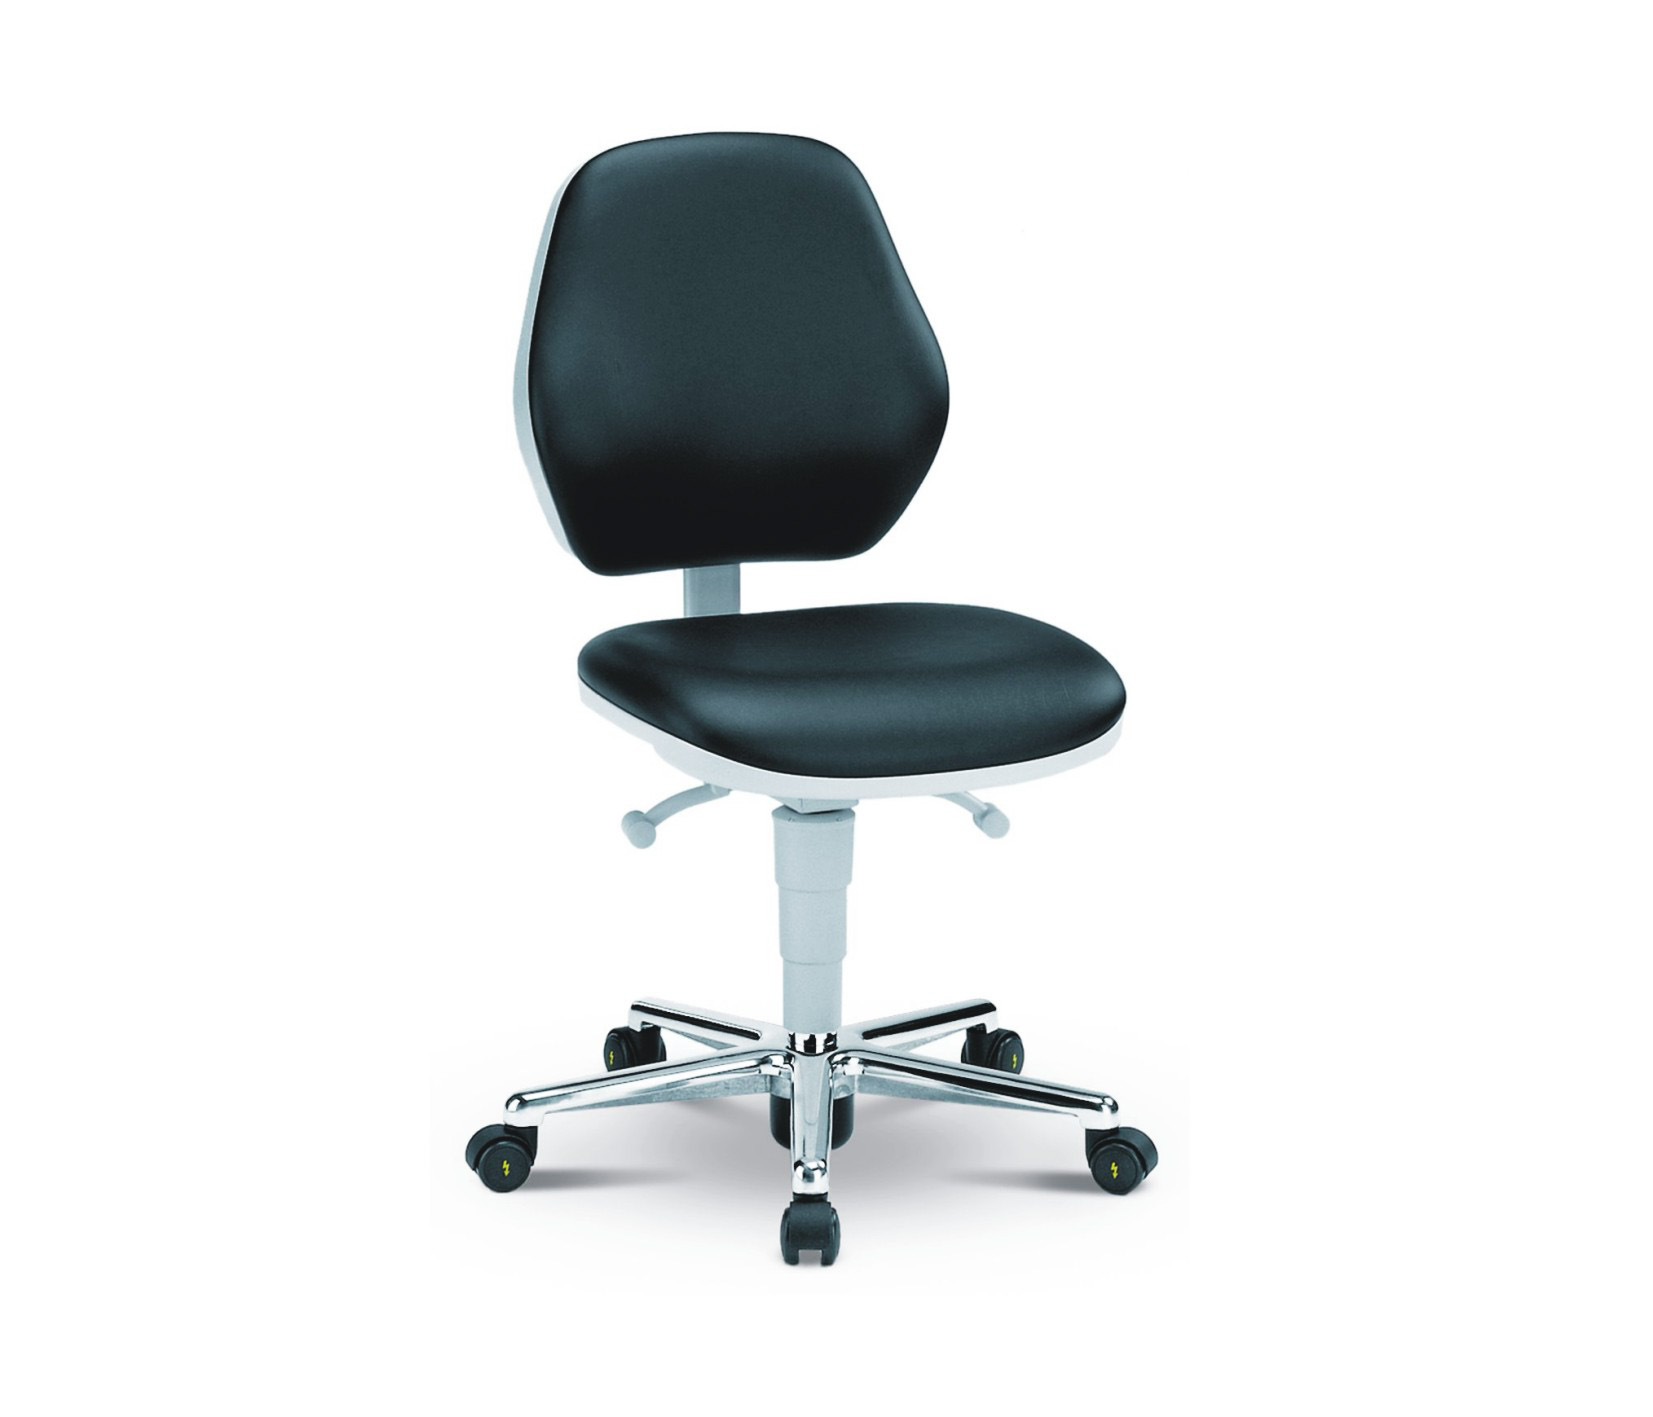 Cleanroom chair Basic with castors, low backrest, cleanroom class ISO 3